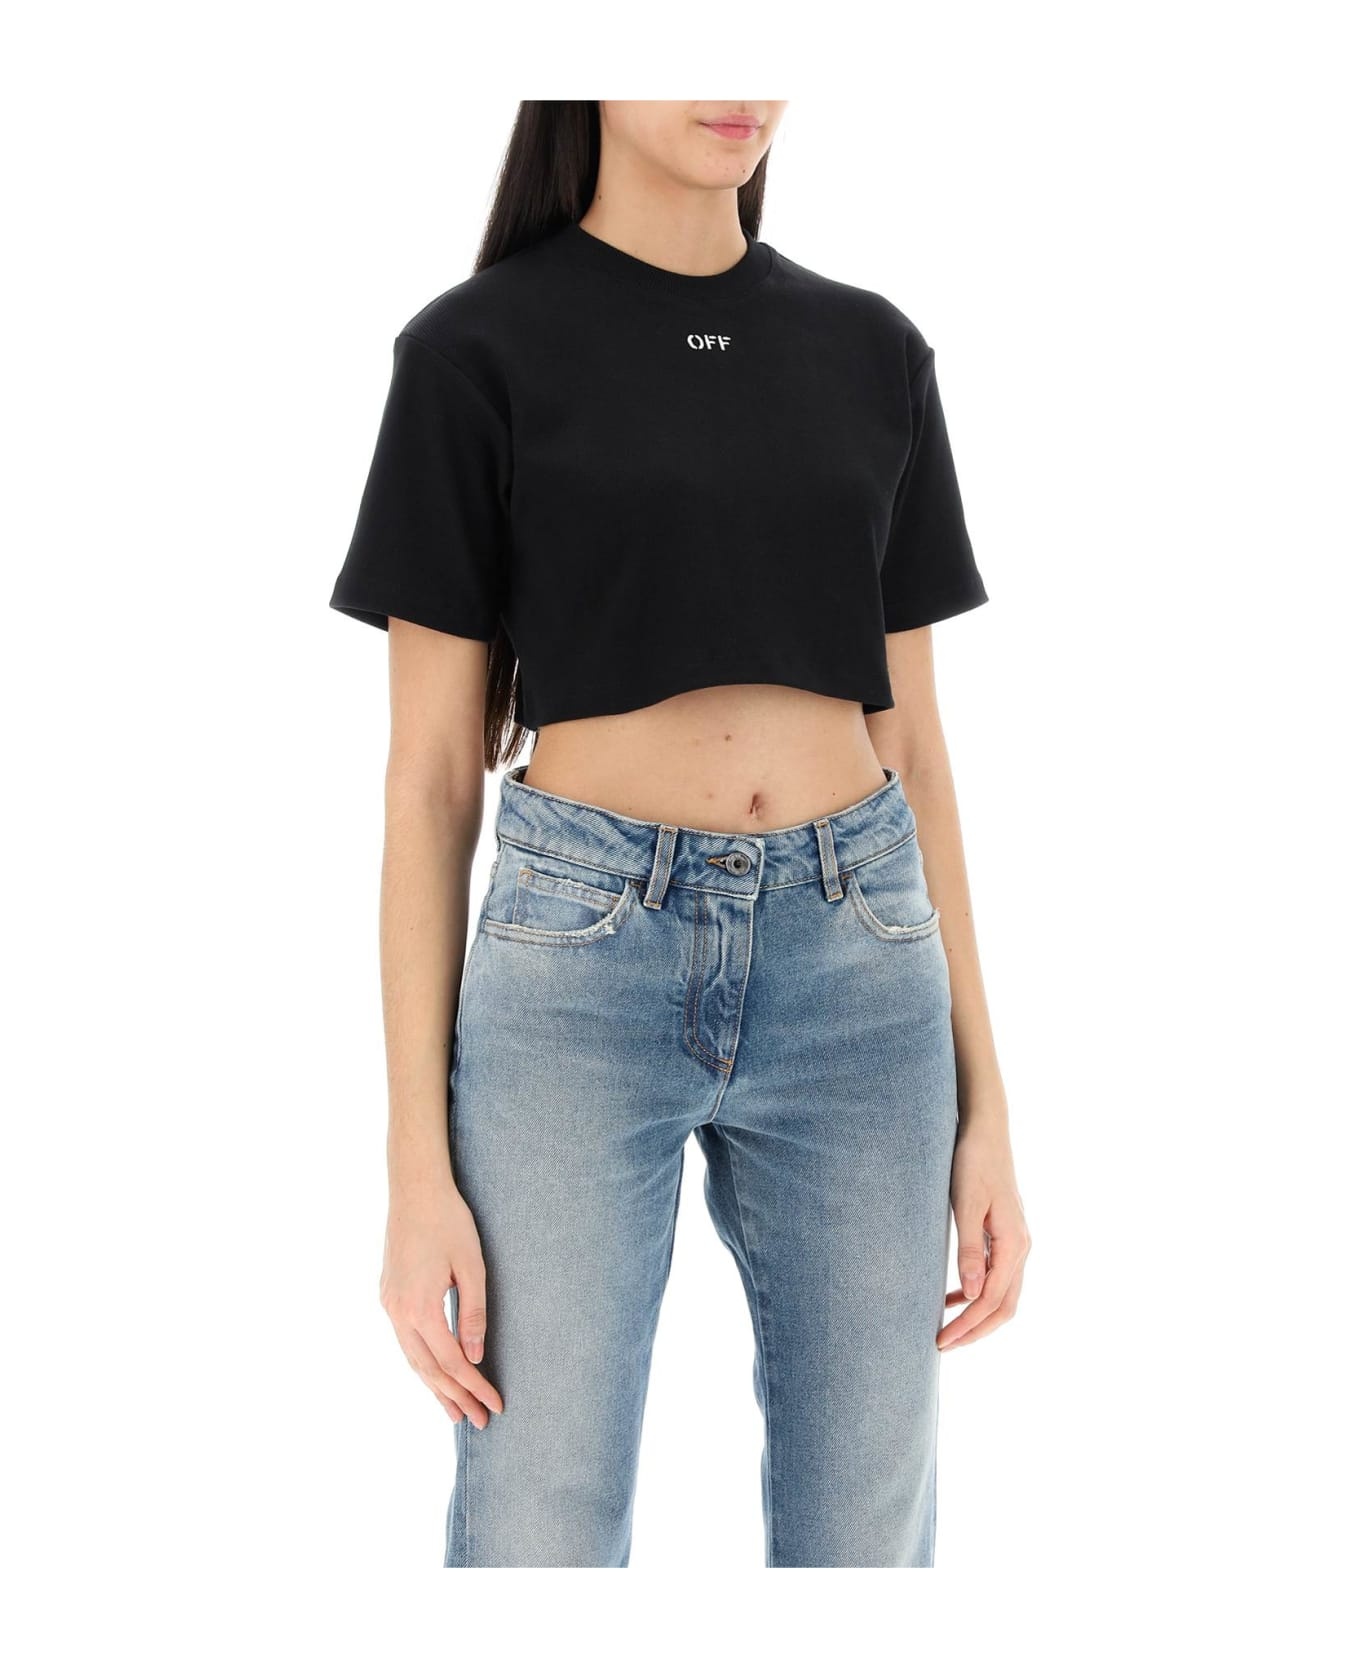 Off Stamp Rib Cropped Tee - 2